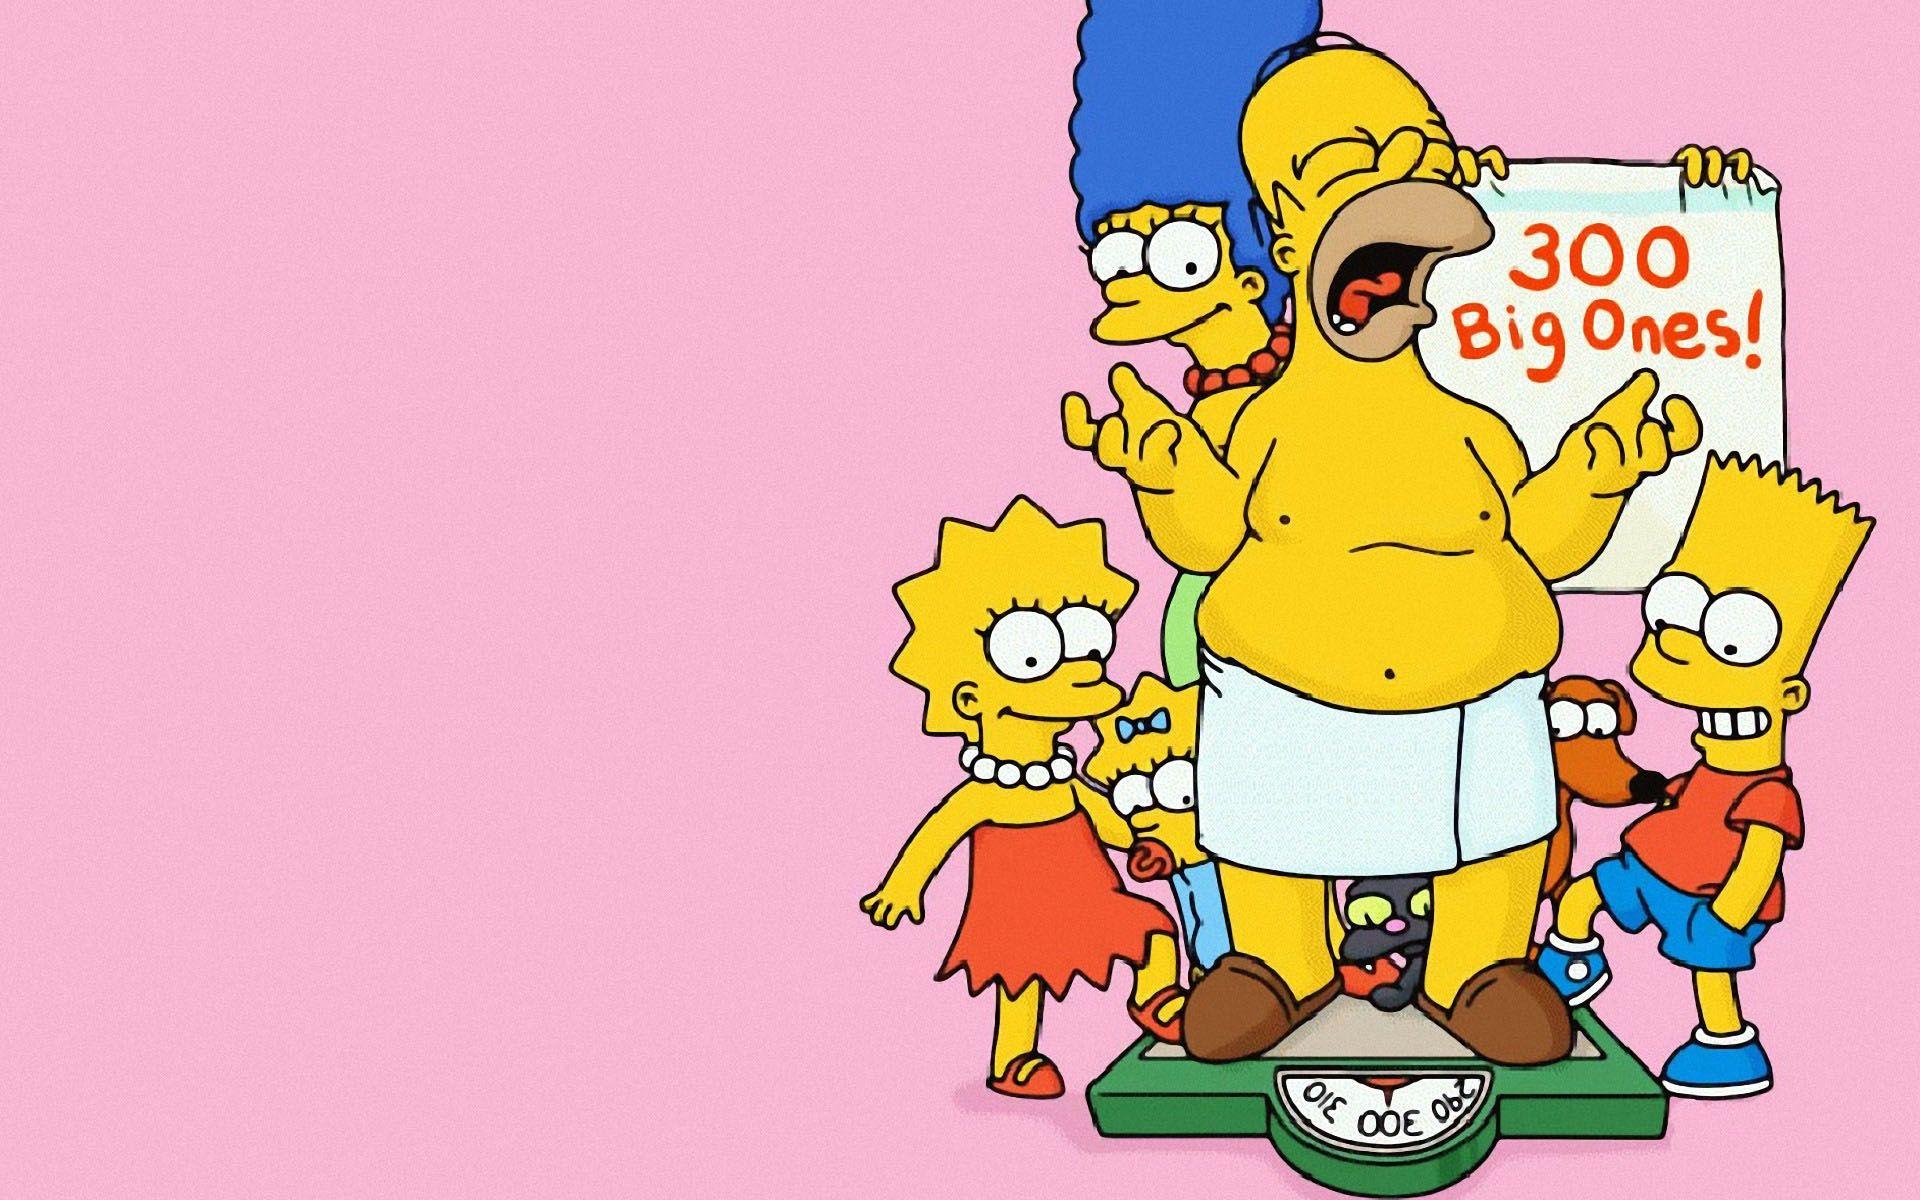 Simpsons Family HD Wallpaper, Background Image